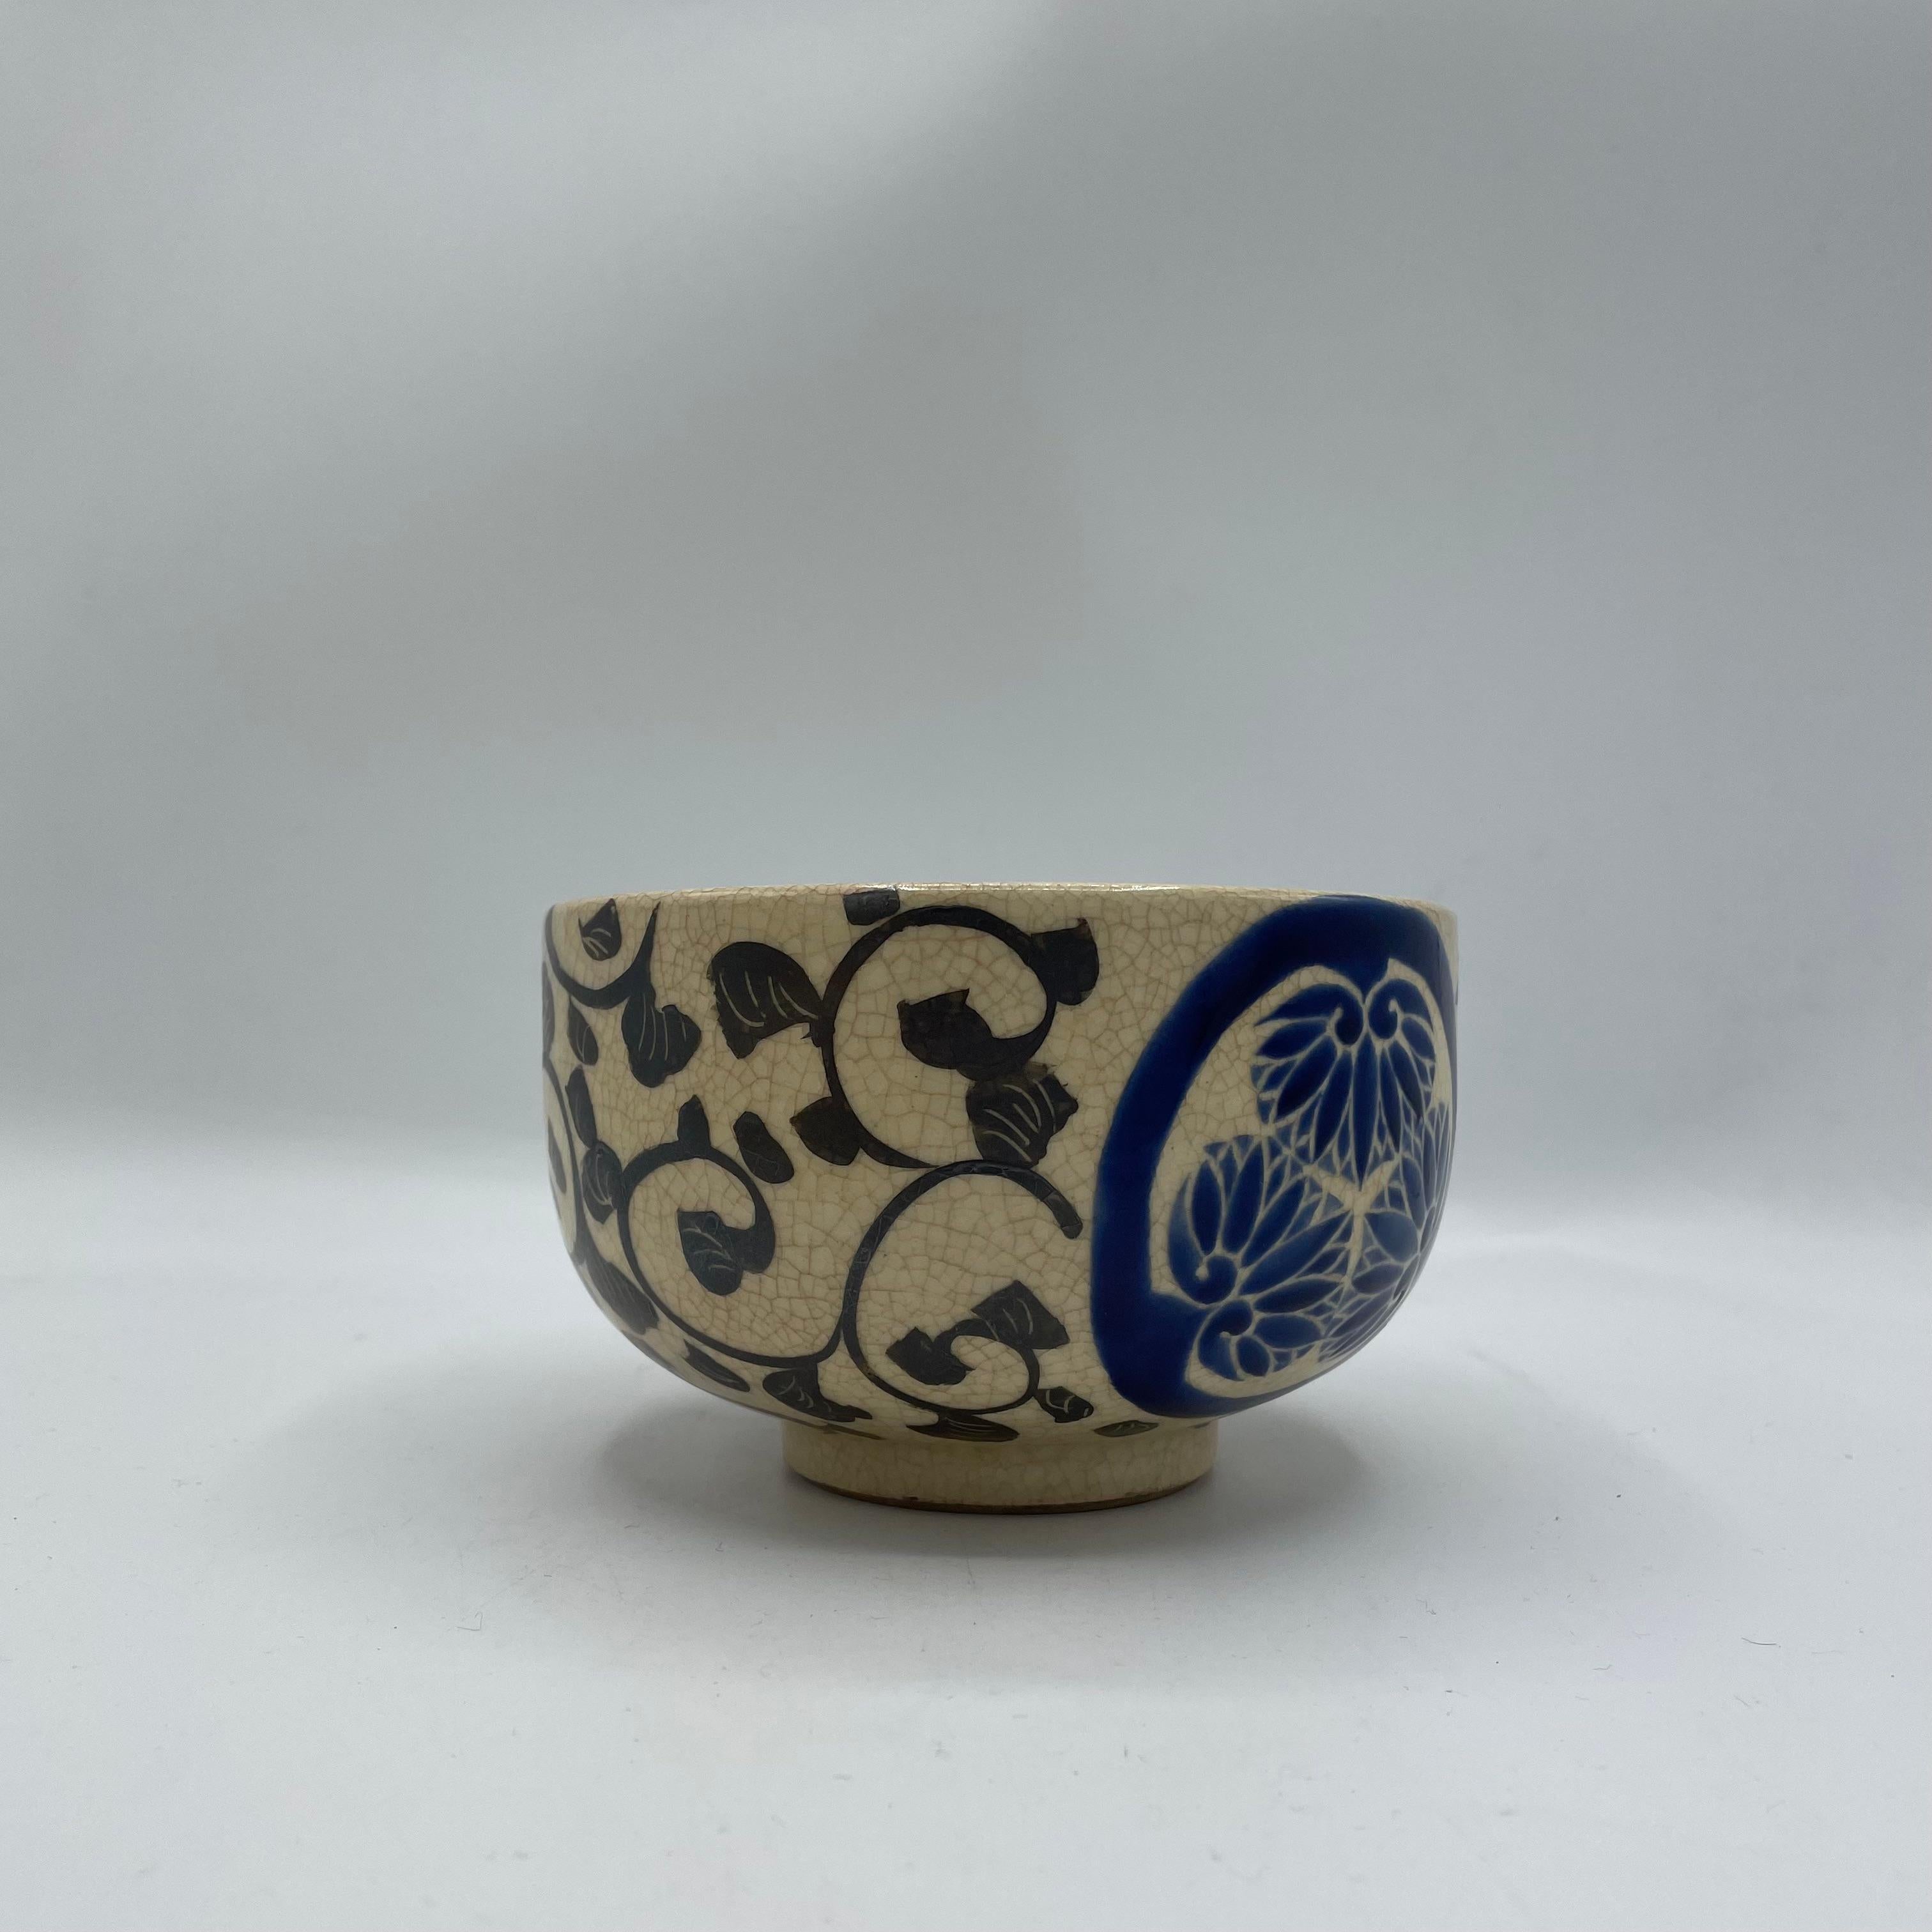 This matcha bowl was made in Japan around 1960s in Showa era.
This bowl will come with a wooden box.
This bowl is made with porcelain and it has family crest of Tokugawa. 
This bowl is used to use for drinking matcha during a tea